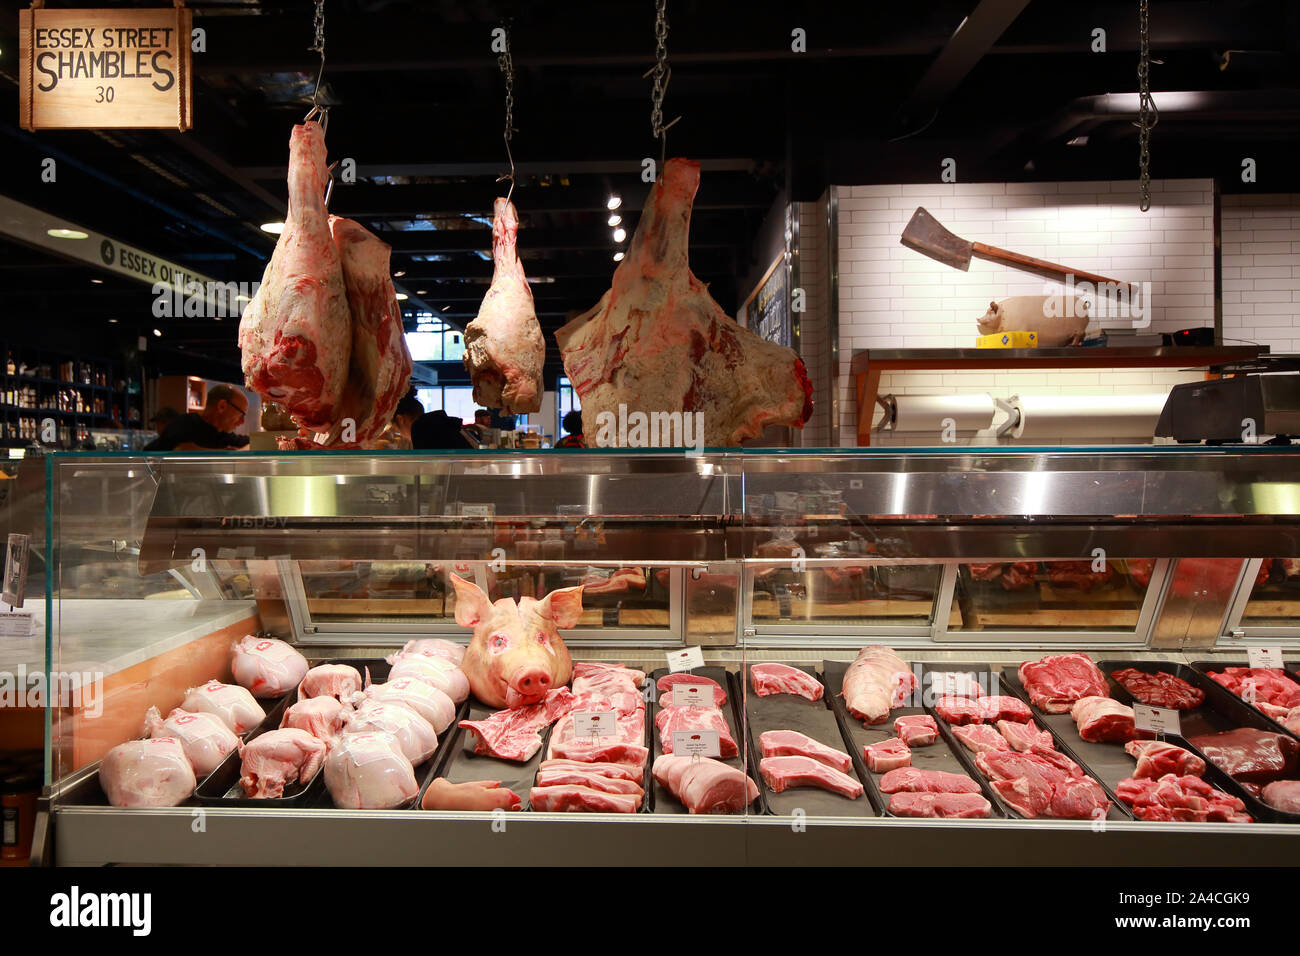 [historical storefront] The Essex Street Shambles butcher shop at the Essex Market in the Lower East Side. Stock Photo